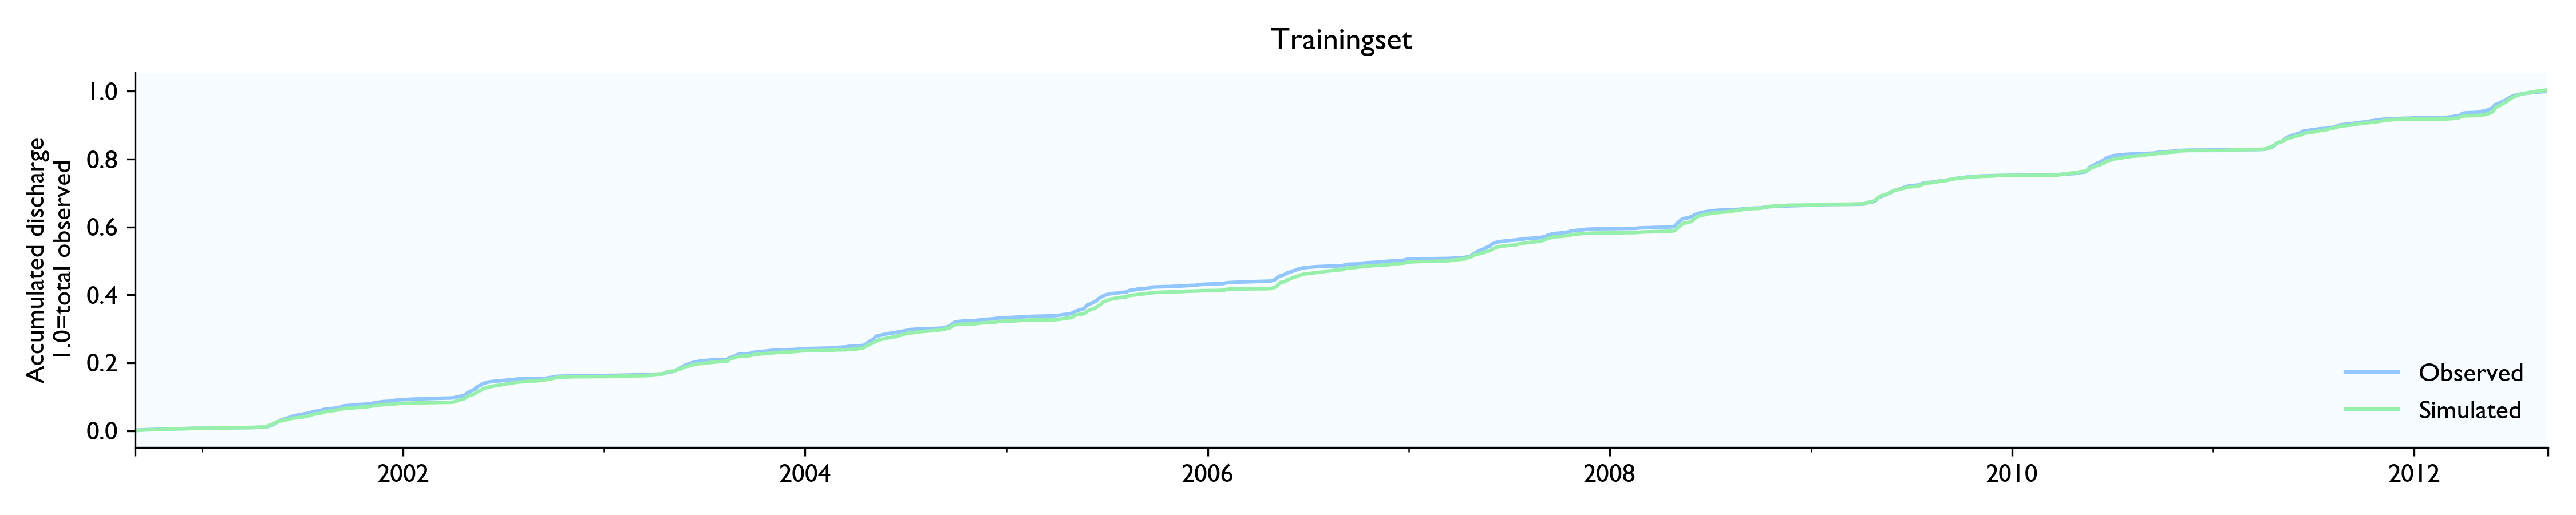 1.4-Trainingset-accumulated.png